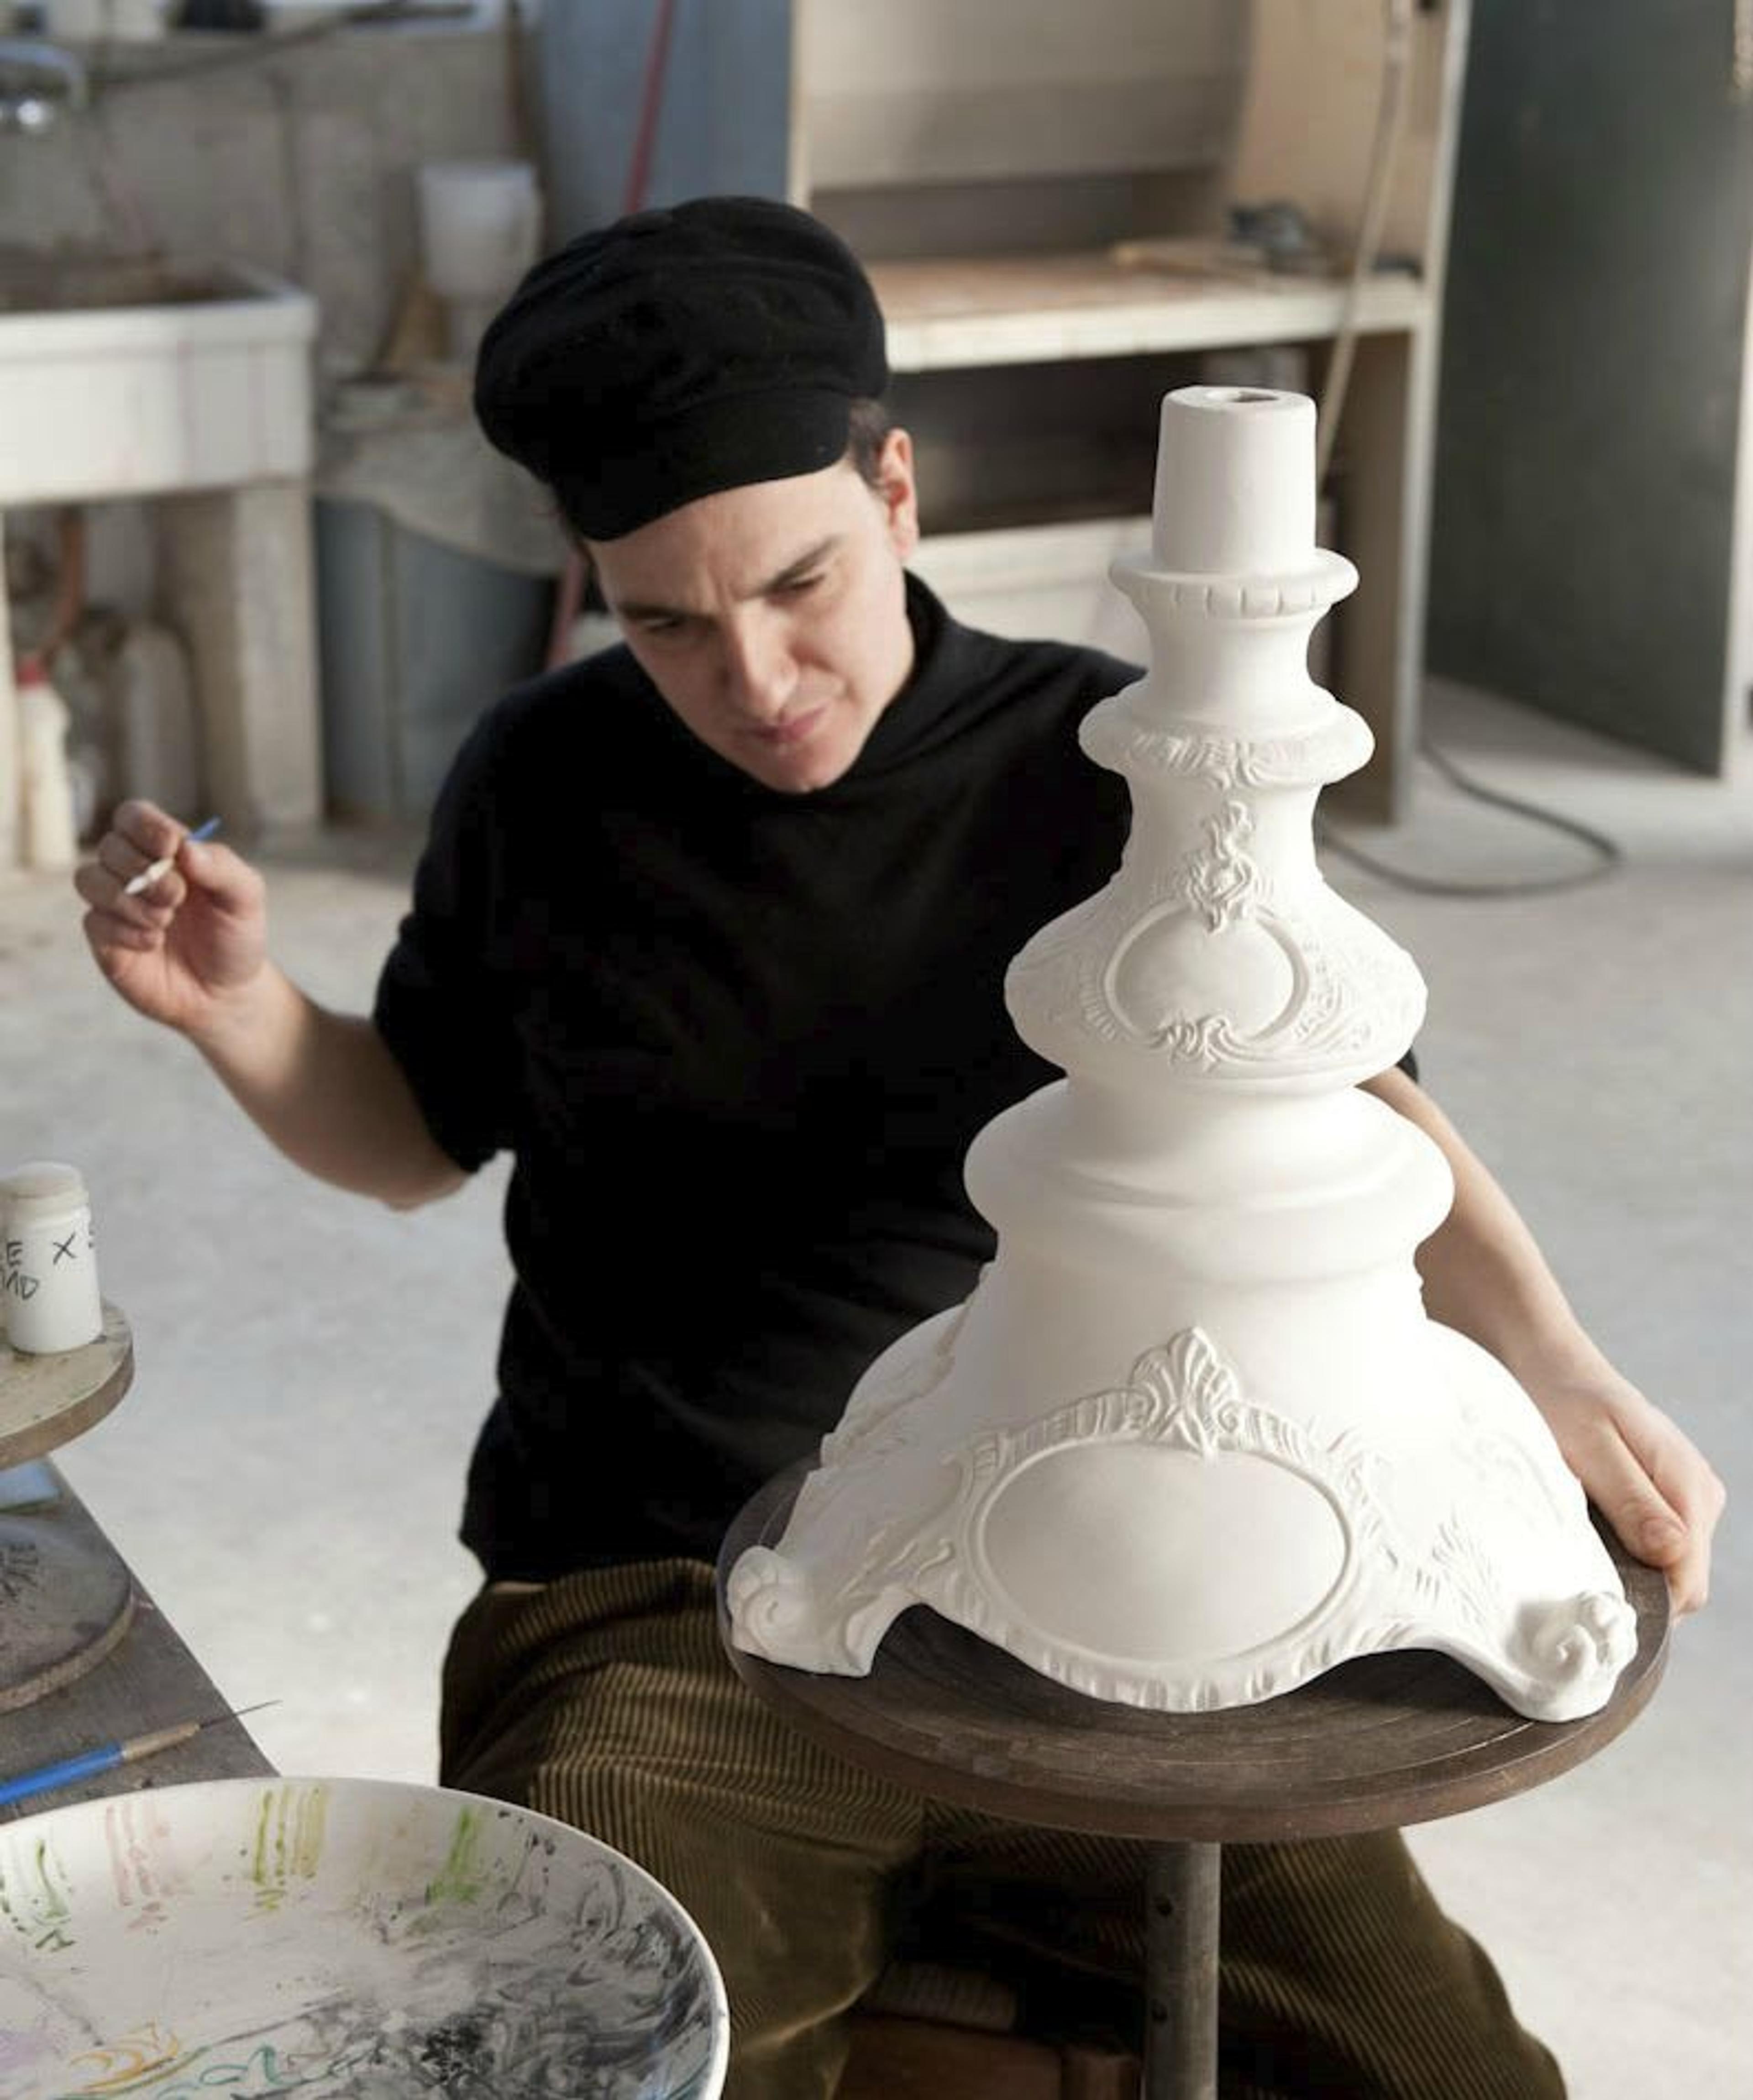 Paolo Polloniato huge ceramic candleholder in the making.